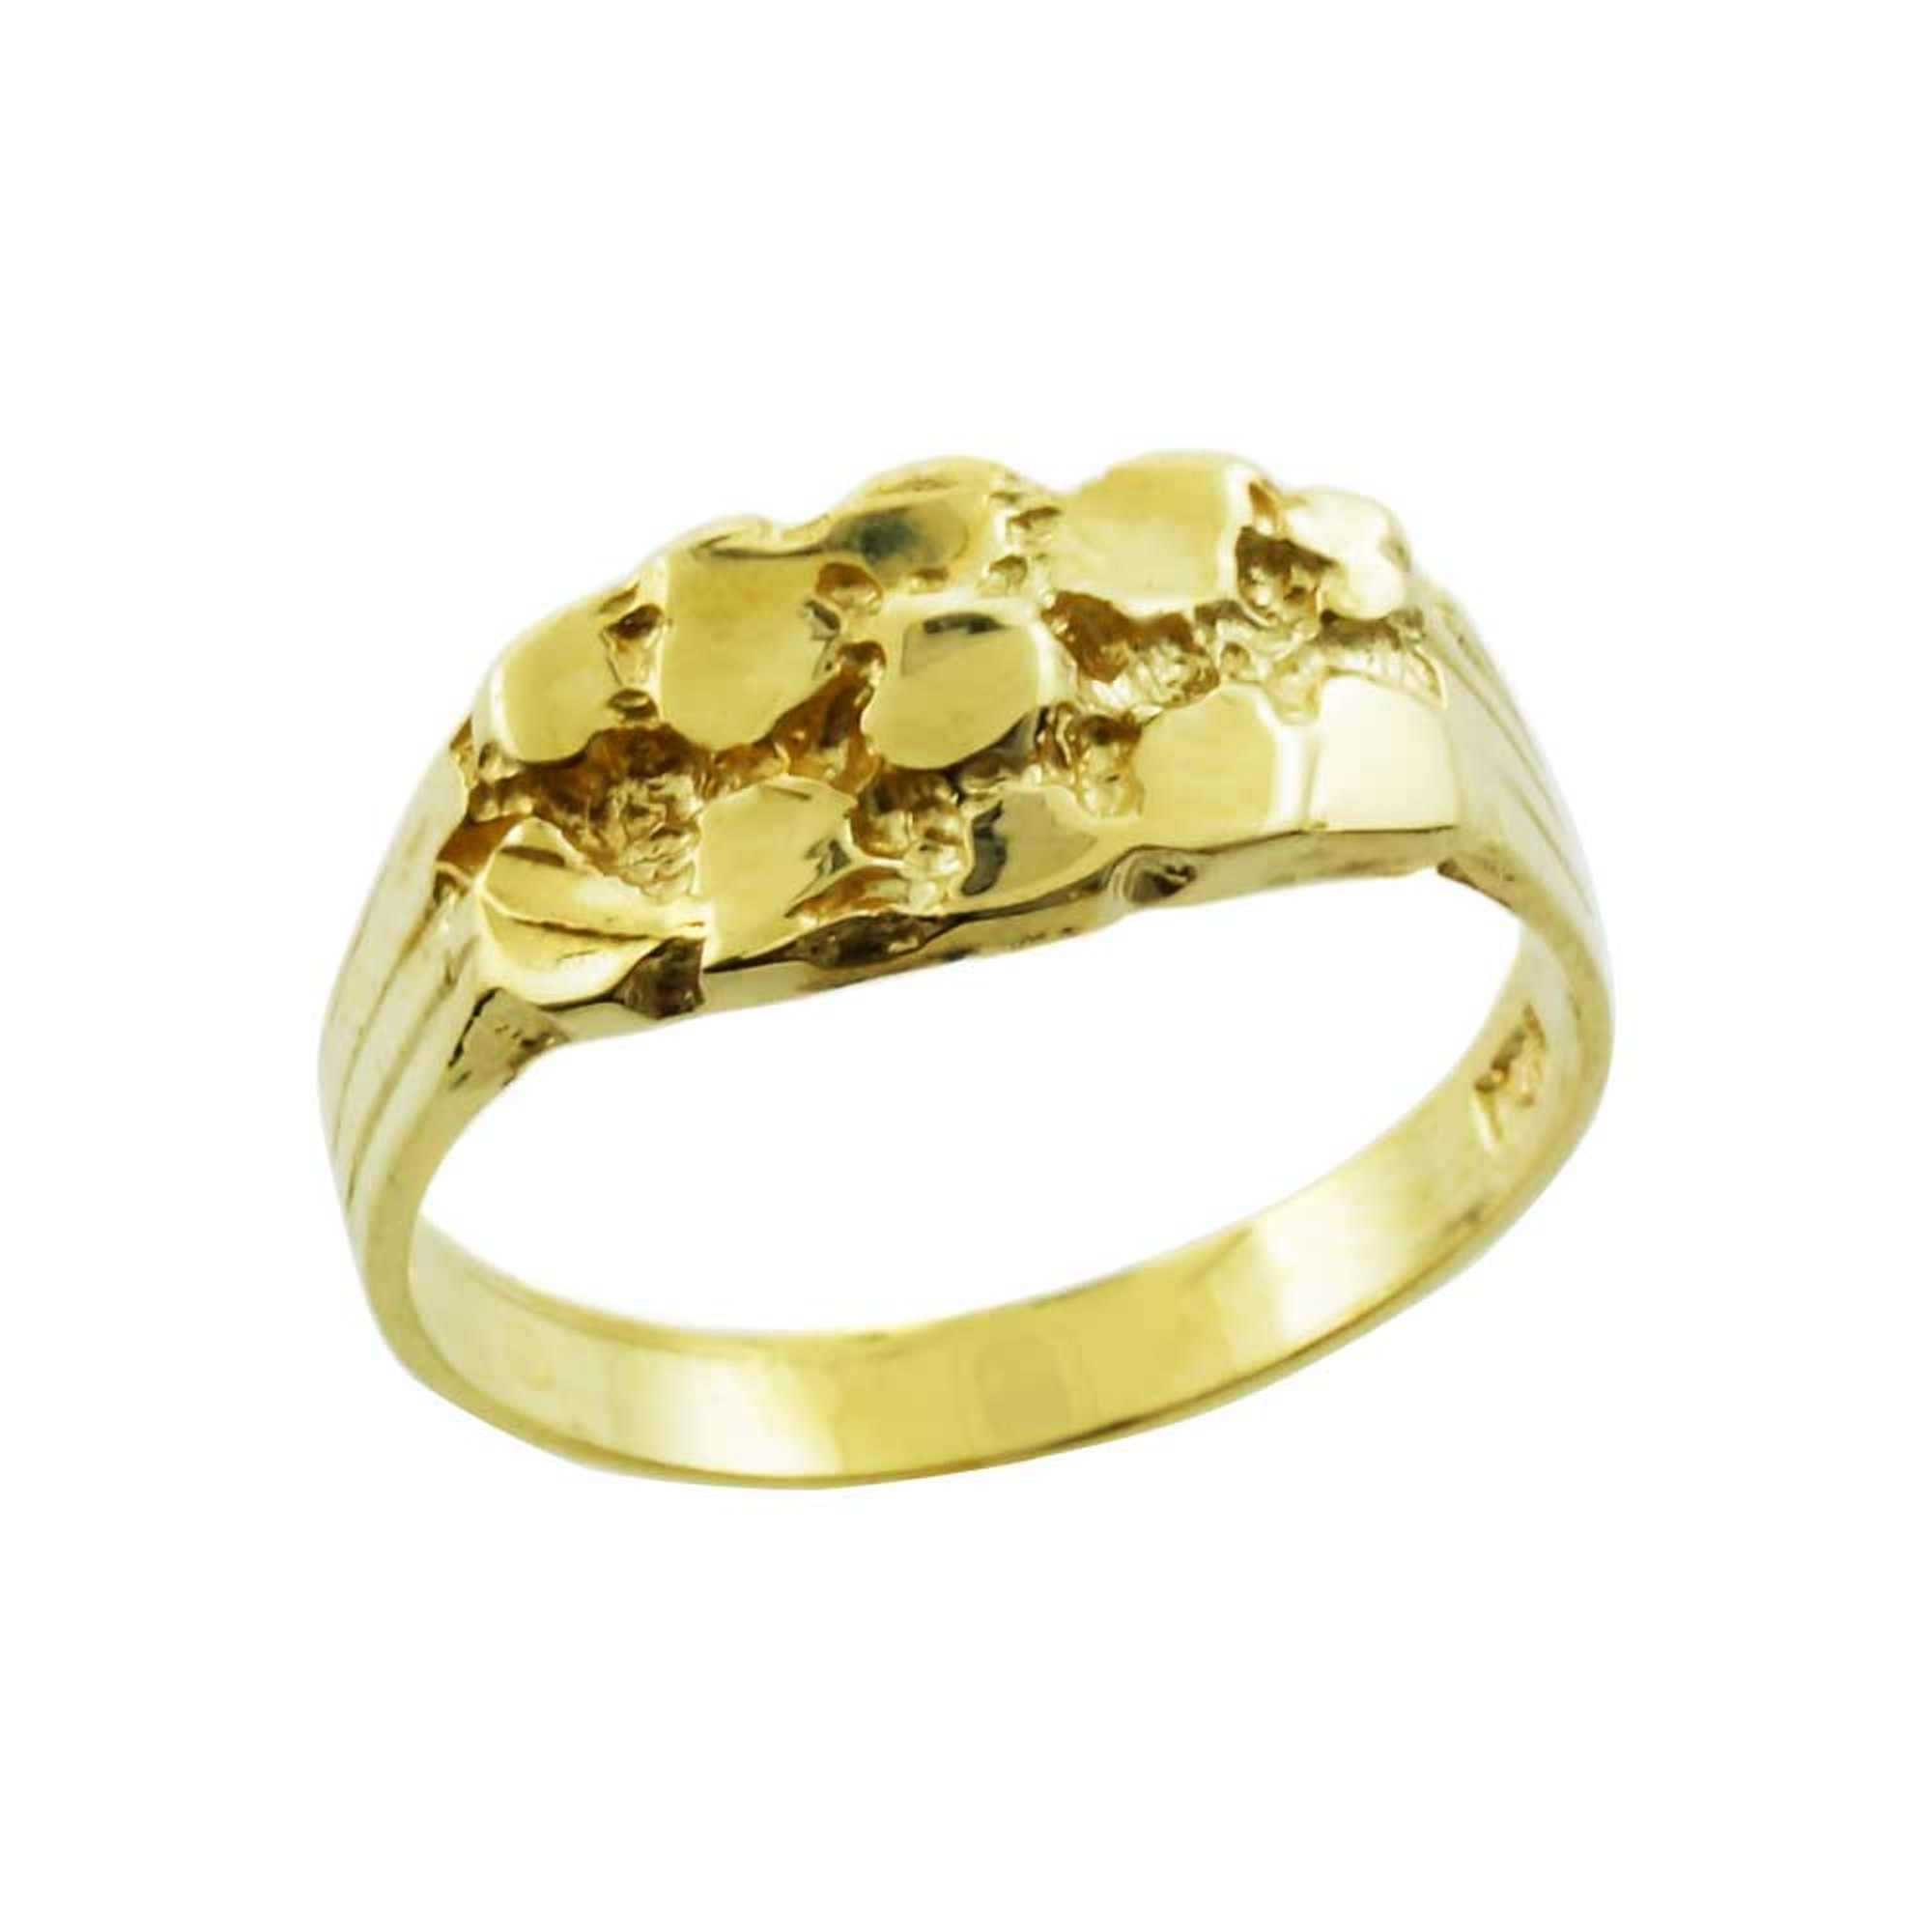 Light weight gents Ring #gents #ring #jewellery,#gentsring | Latest gold  ring designs, Gold ring designs, Gents gold ring